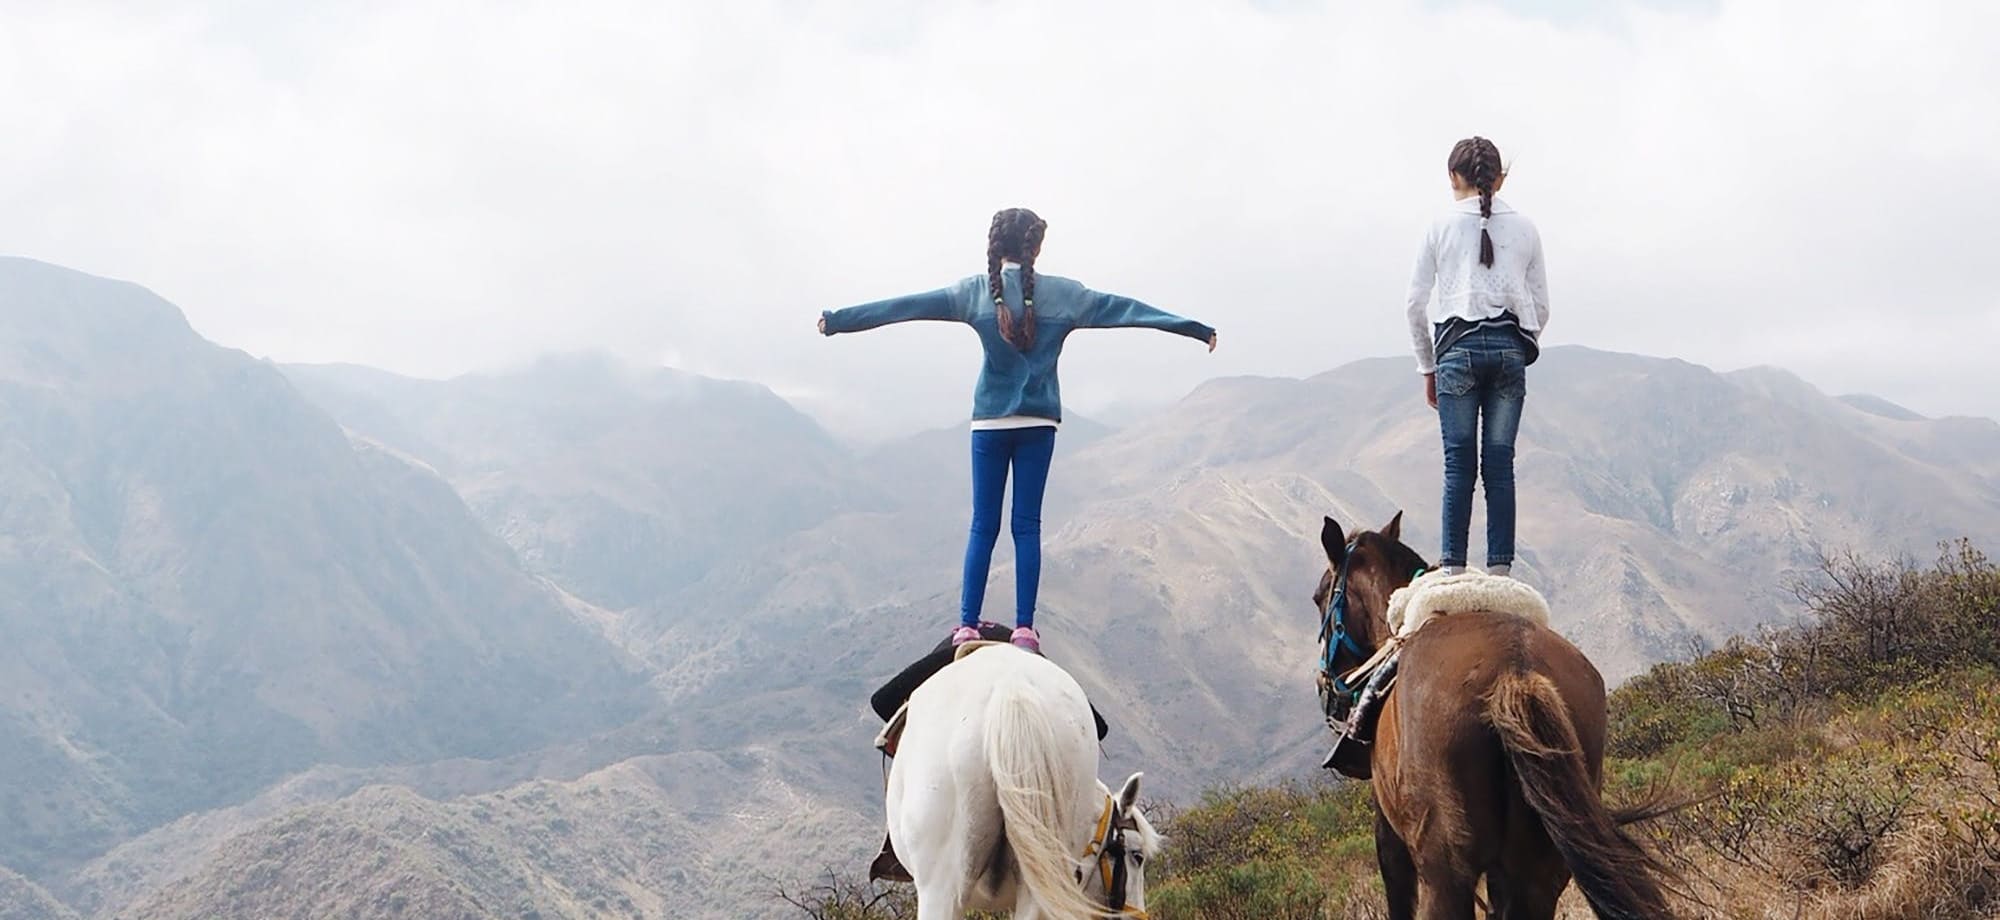 Two young girls are standing on horses' backs overlooking mountains. 